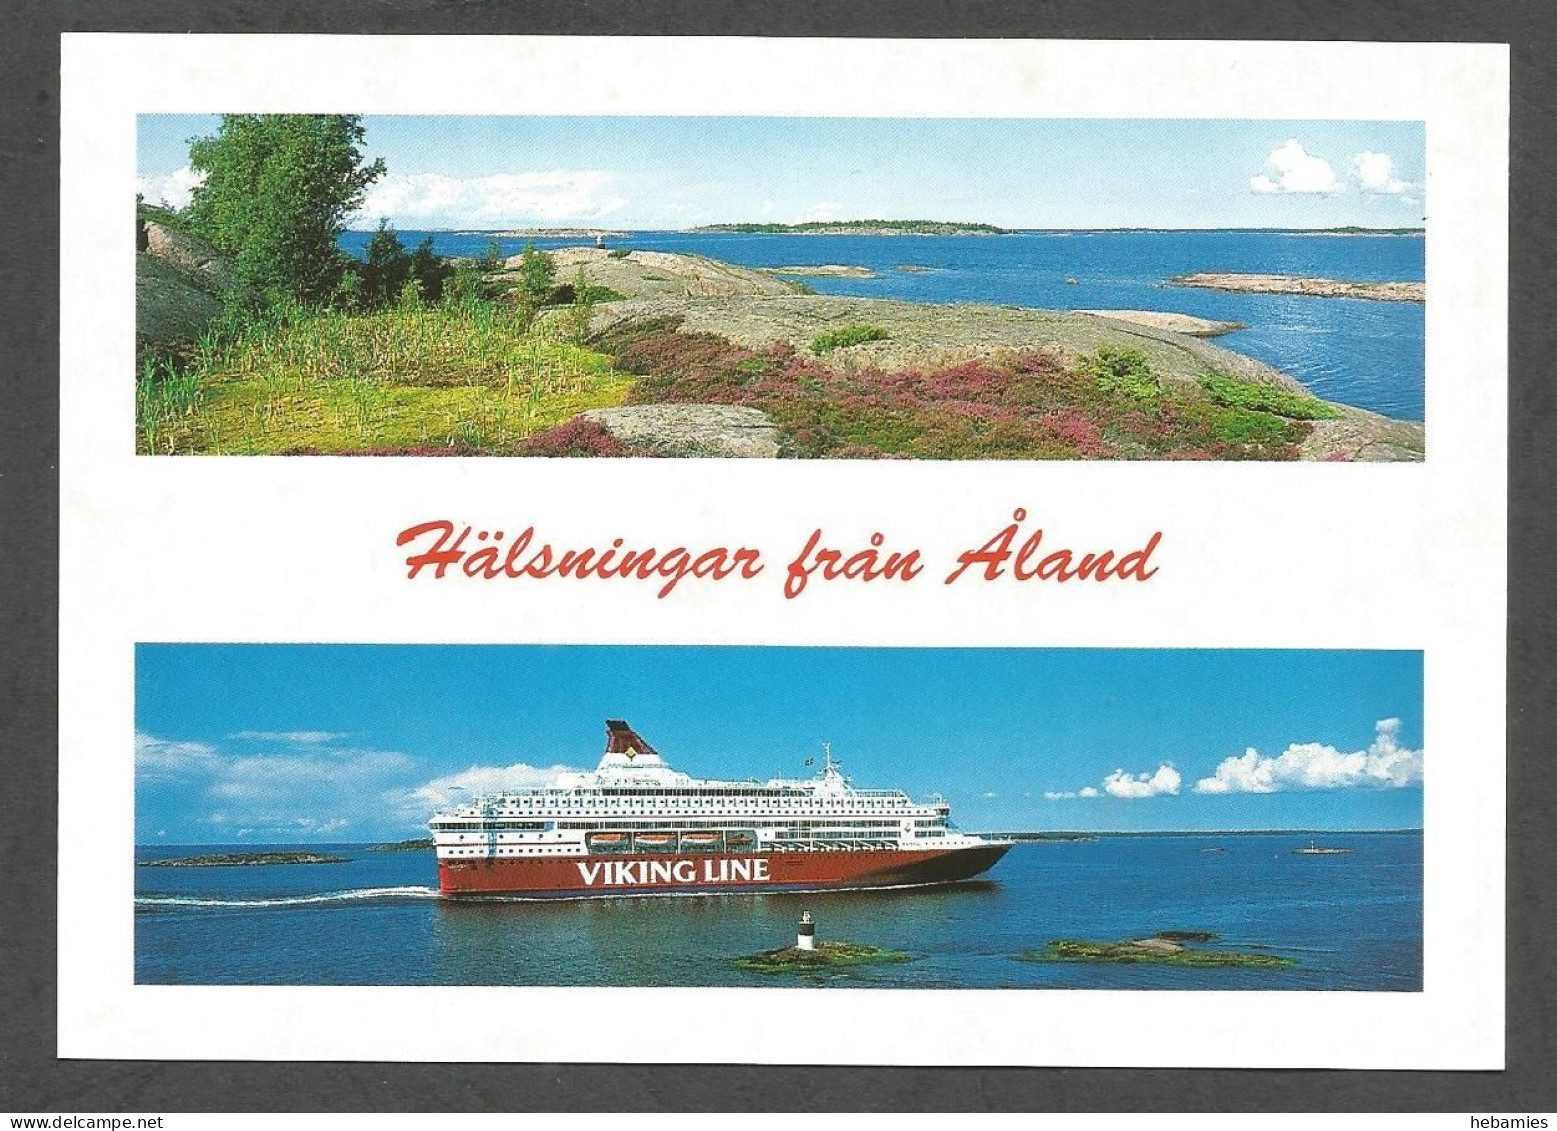 ÅLAND - CRUISE LINER And ARCHIPELAGO - FINLAND - - Finland